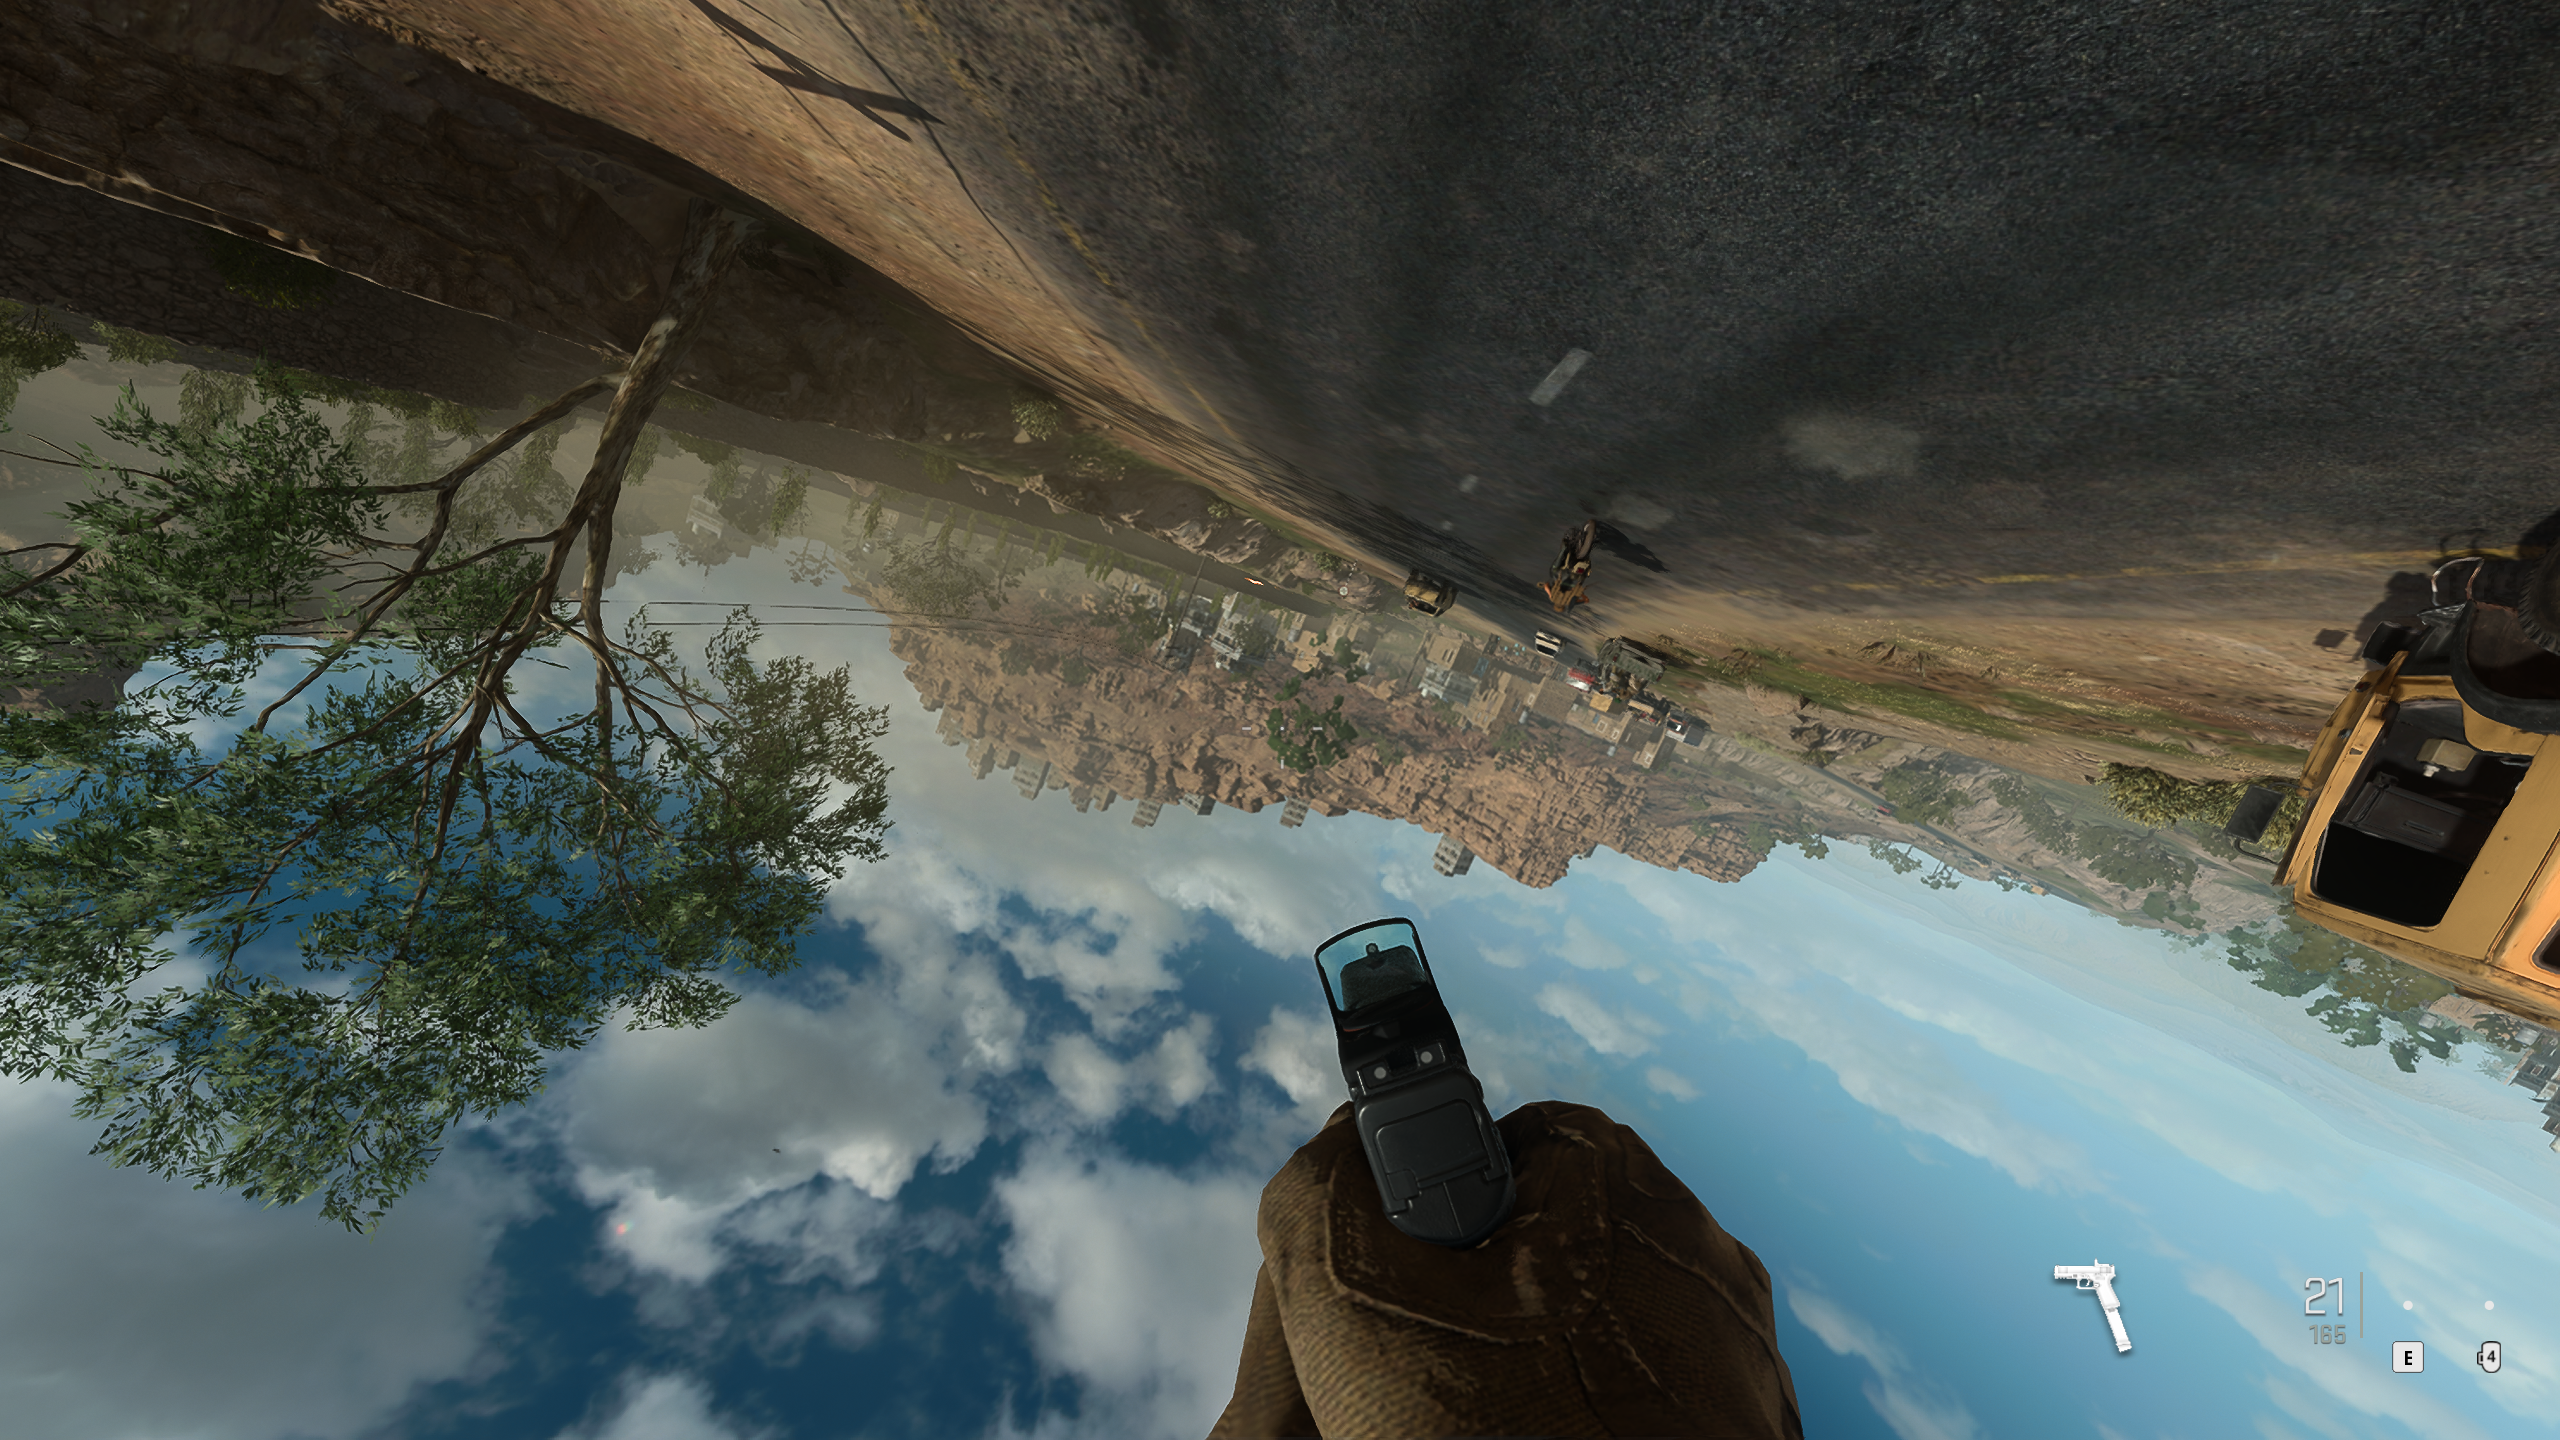 View of player shooting whilst upside down from helicopter